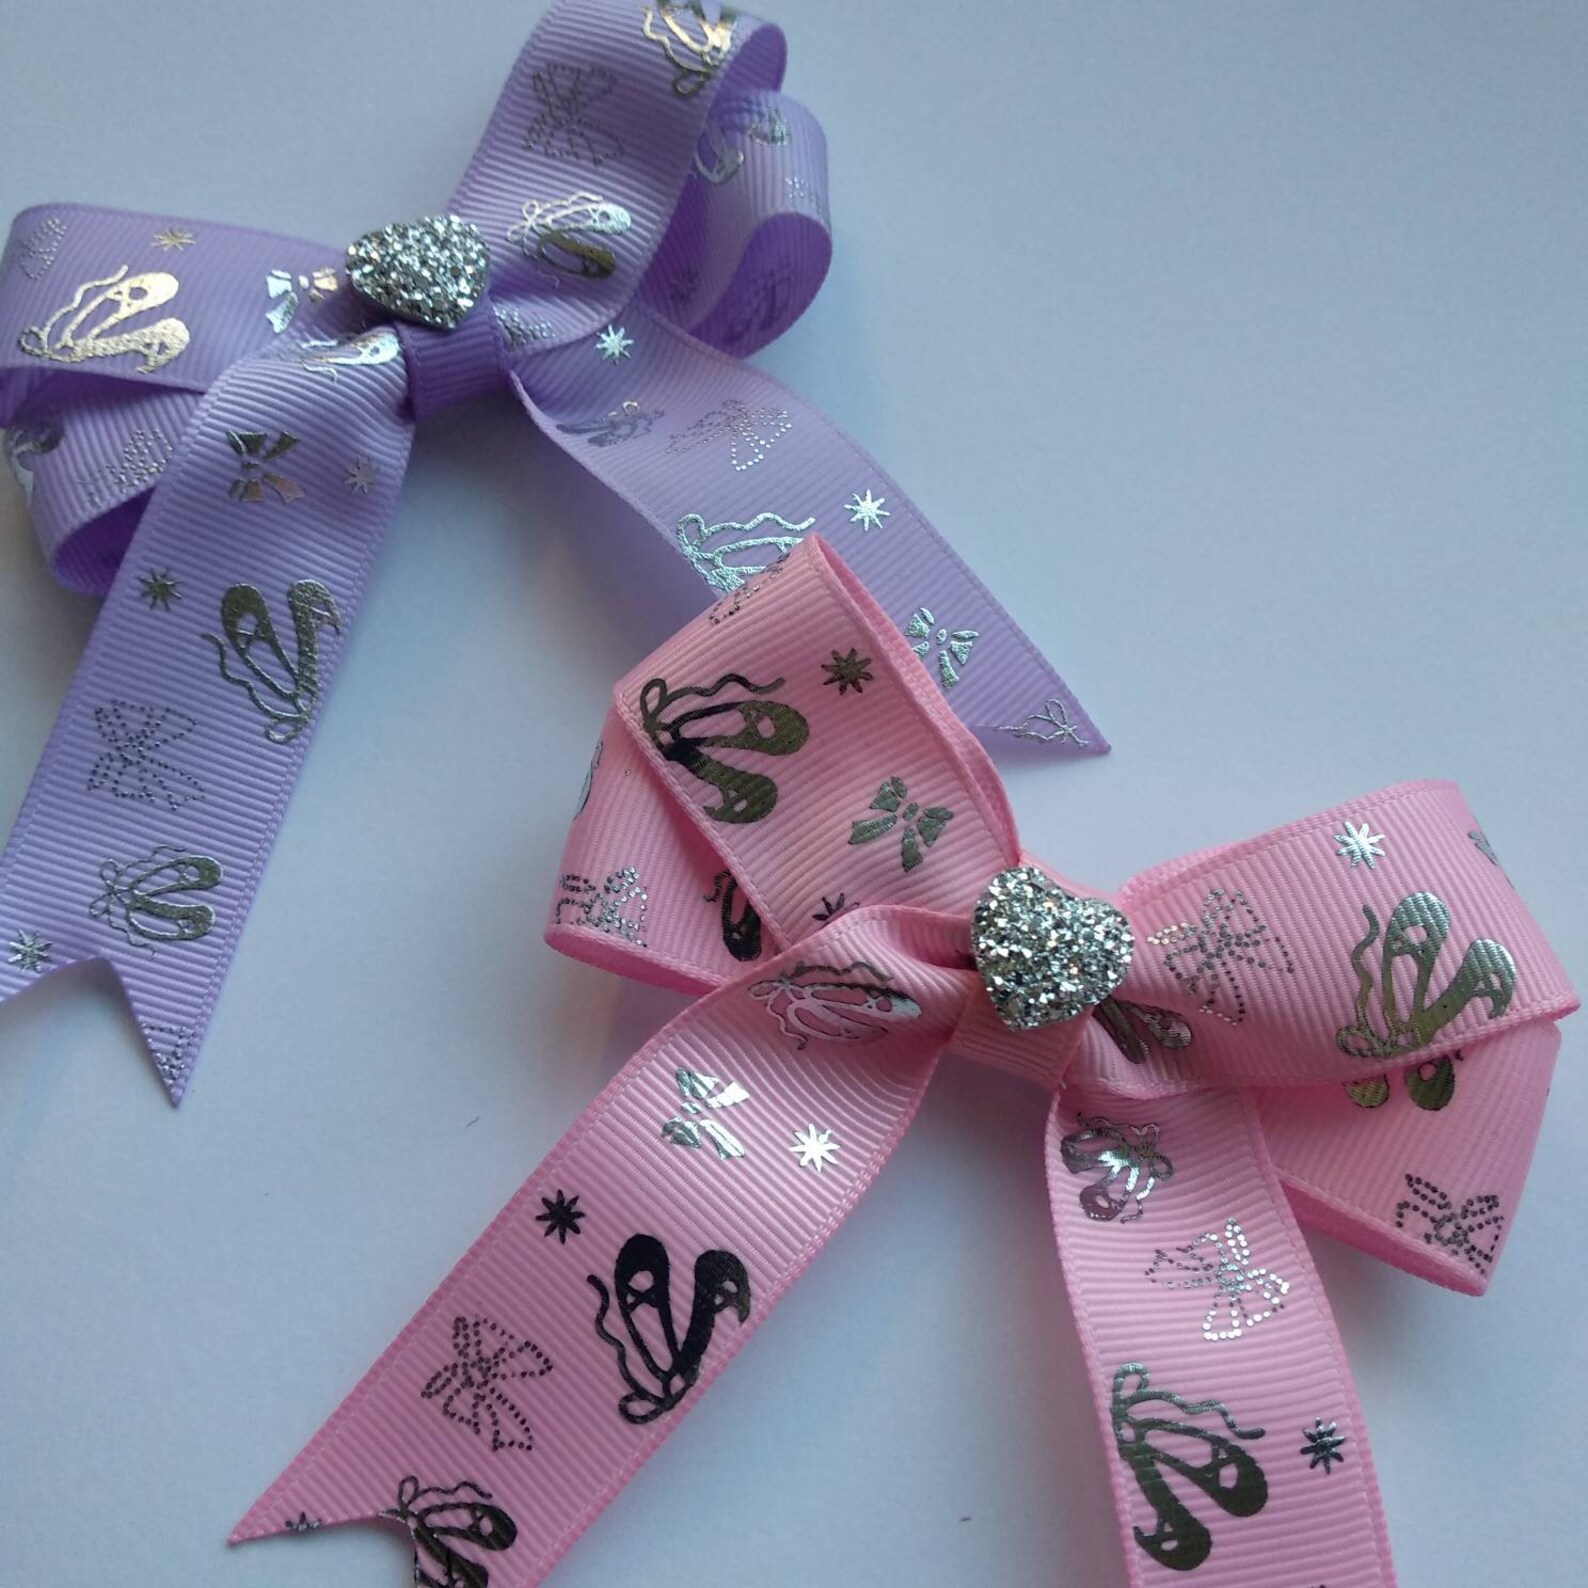 pack of 2 ballerina hair bows on clips or elastic, with silver ballet details and shiny heart centre. perfect gift for little da